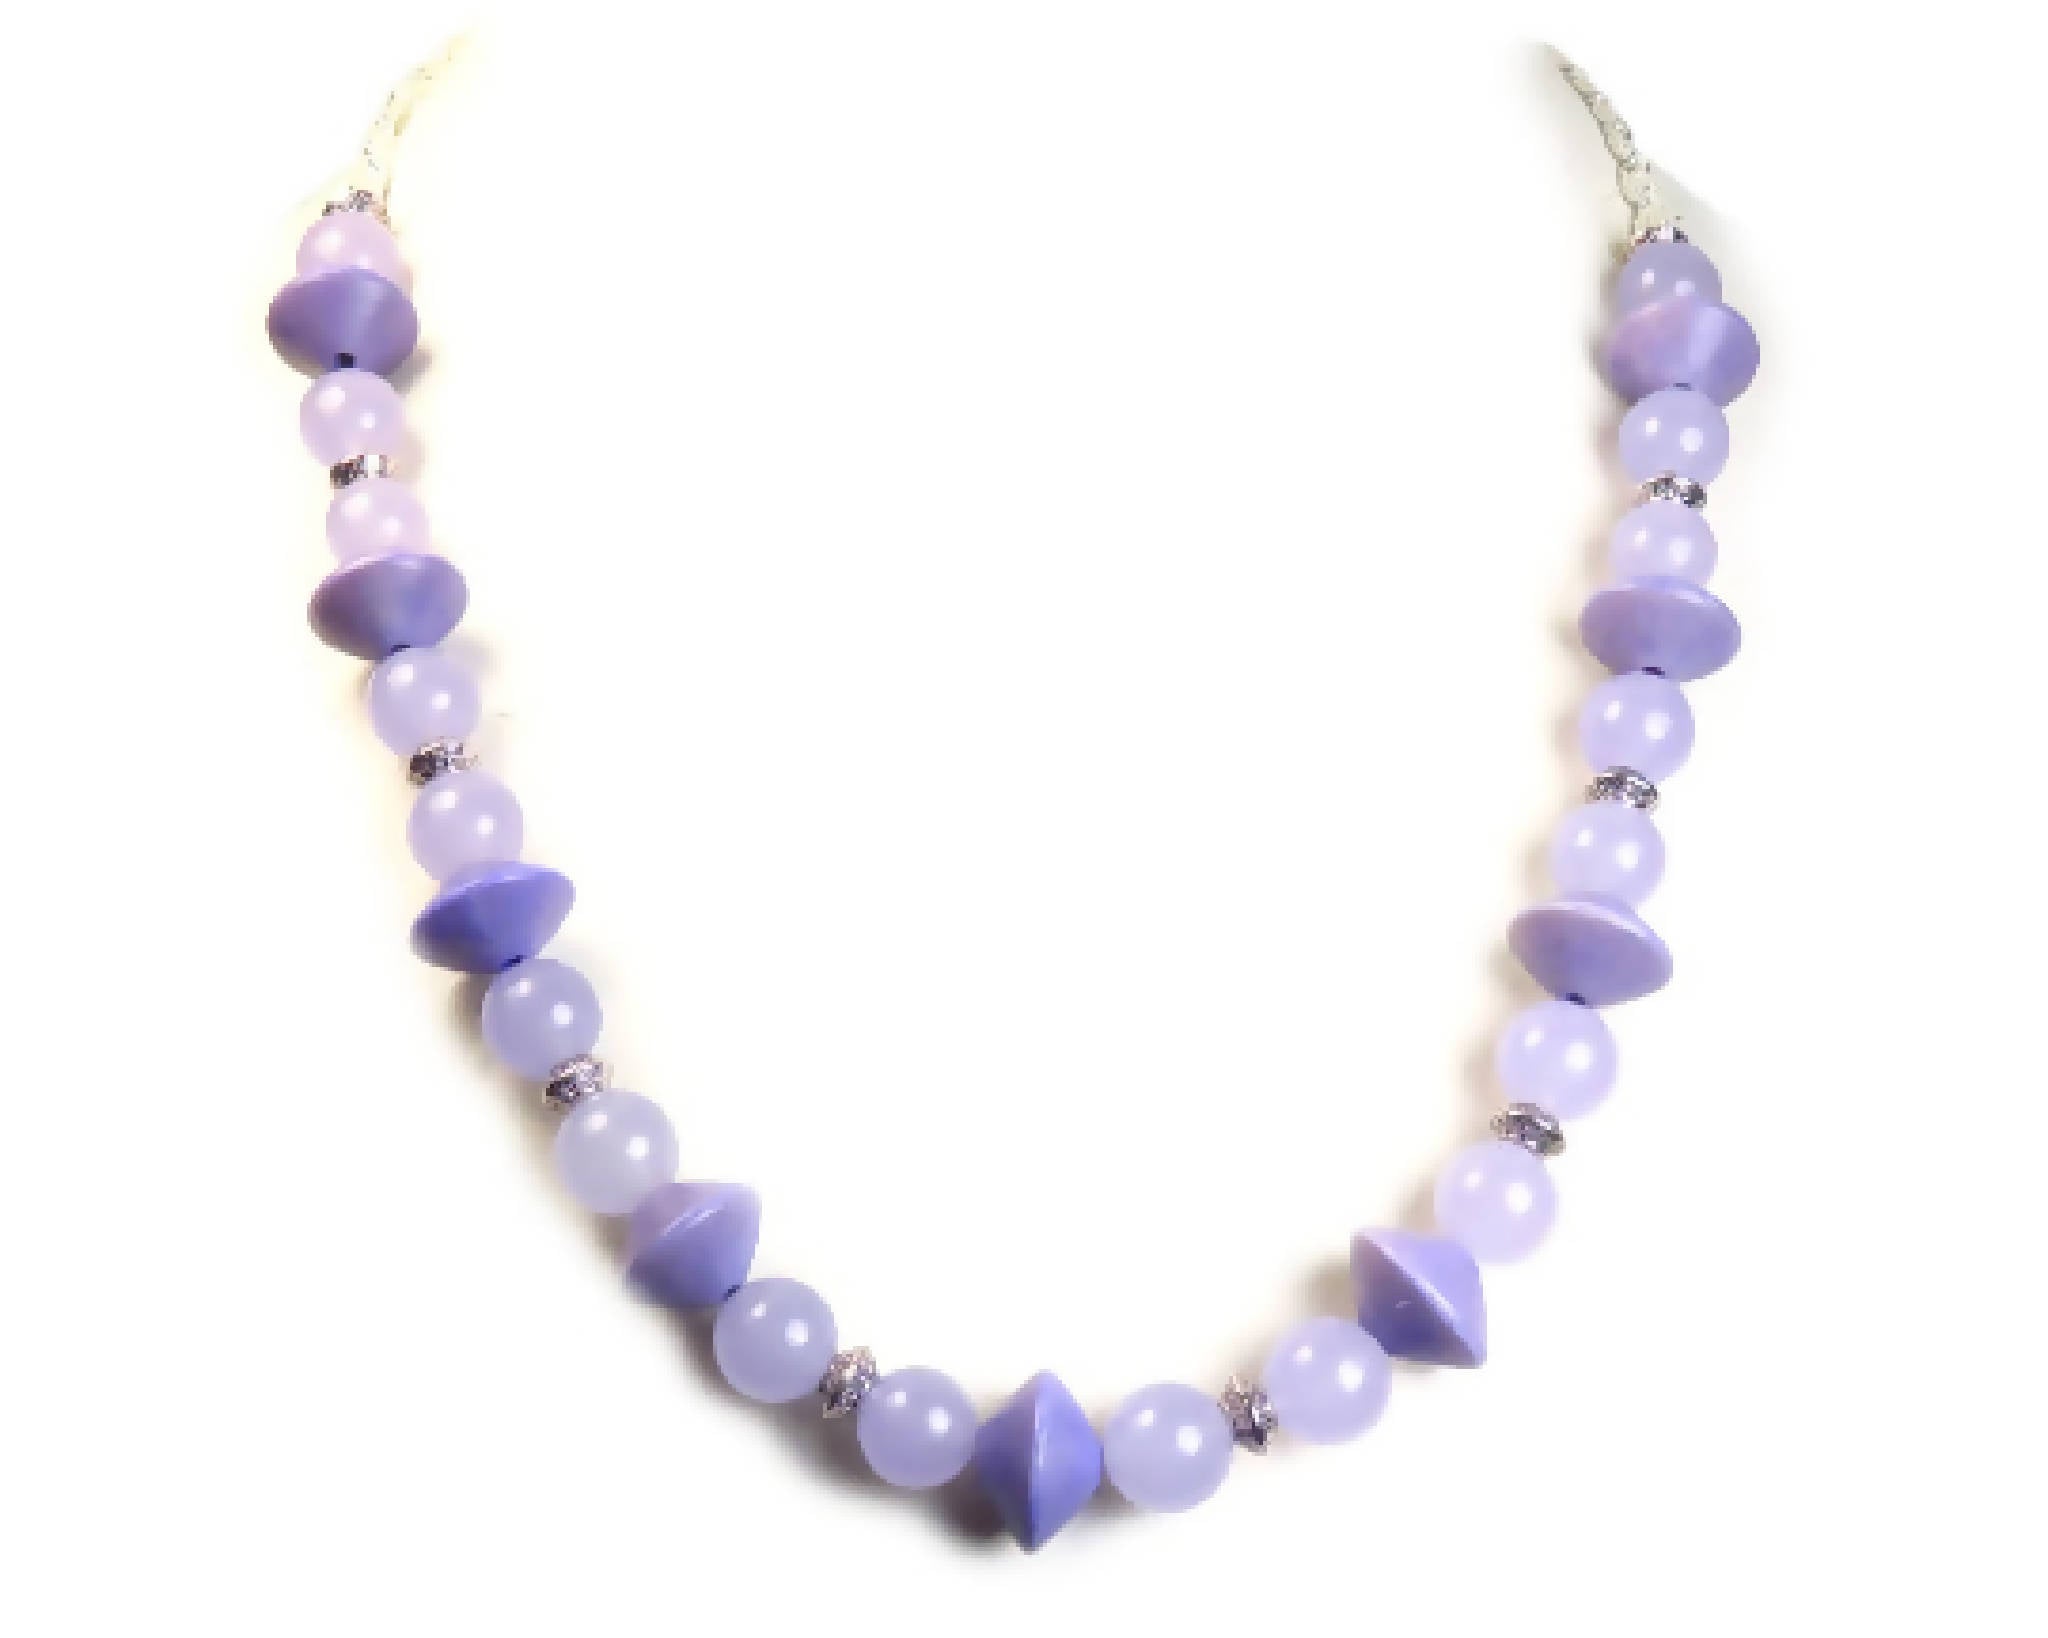 Unique by Dragonheart 54cm necklace and 4.5cm drop Earrings set featuring purple jade and painted wood